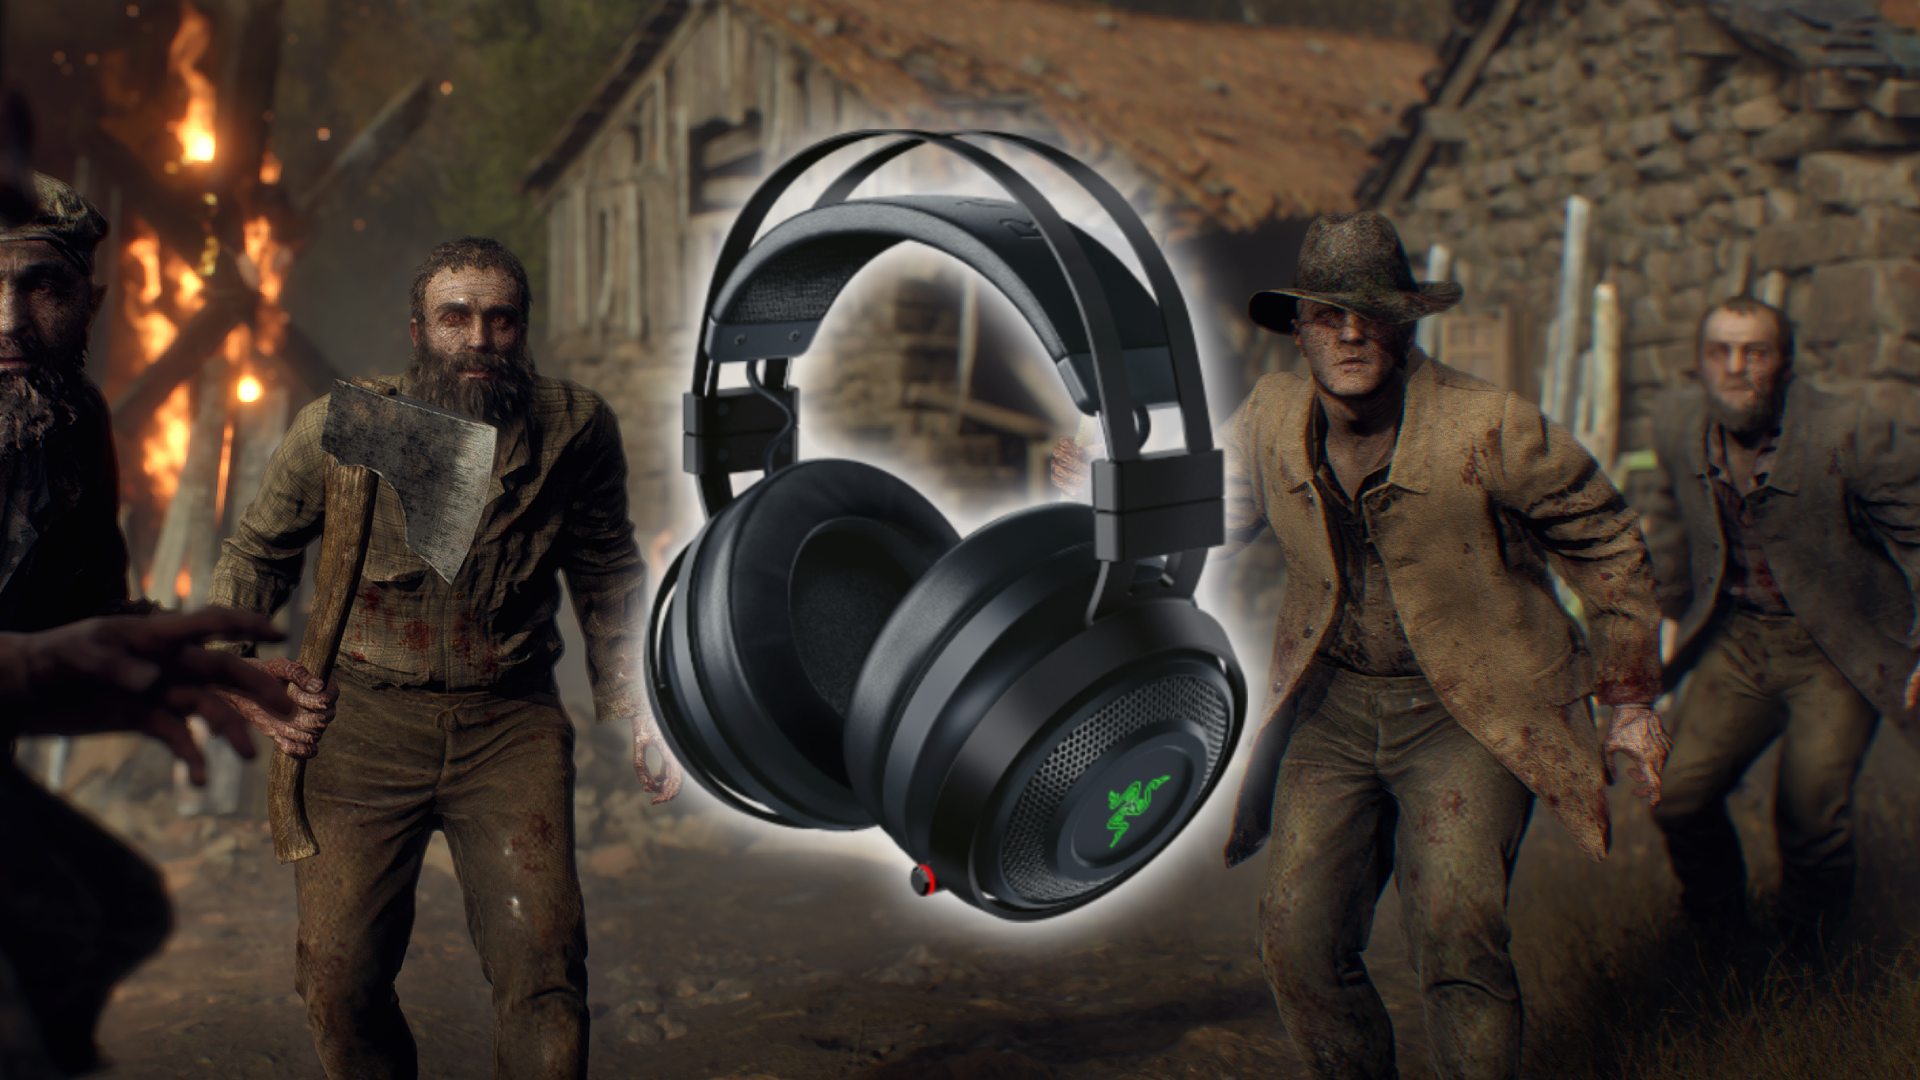 Grab 50% off this Razer headset for a creepy RE4 Remake